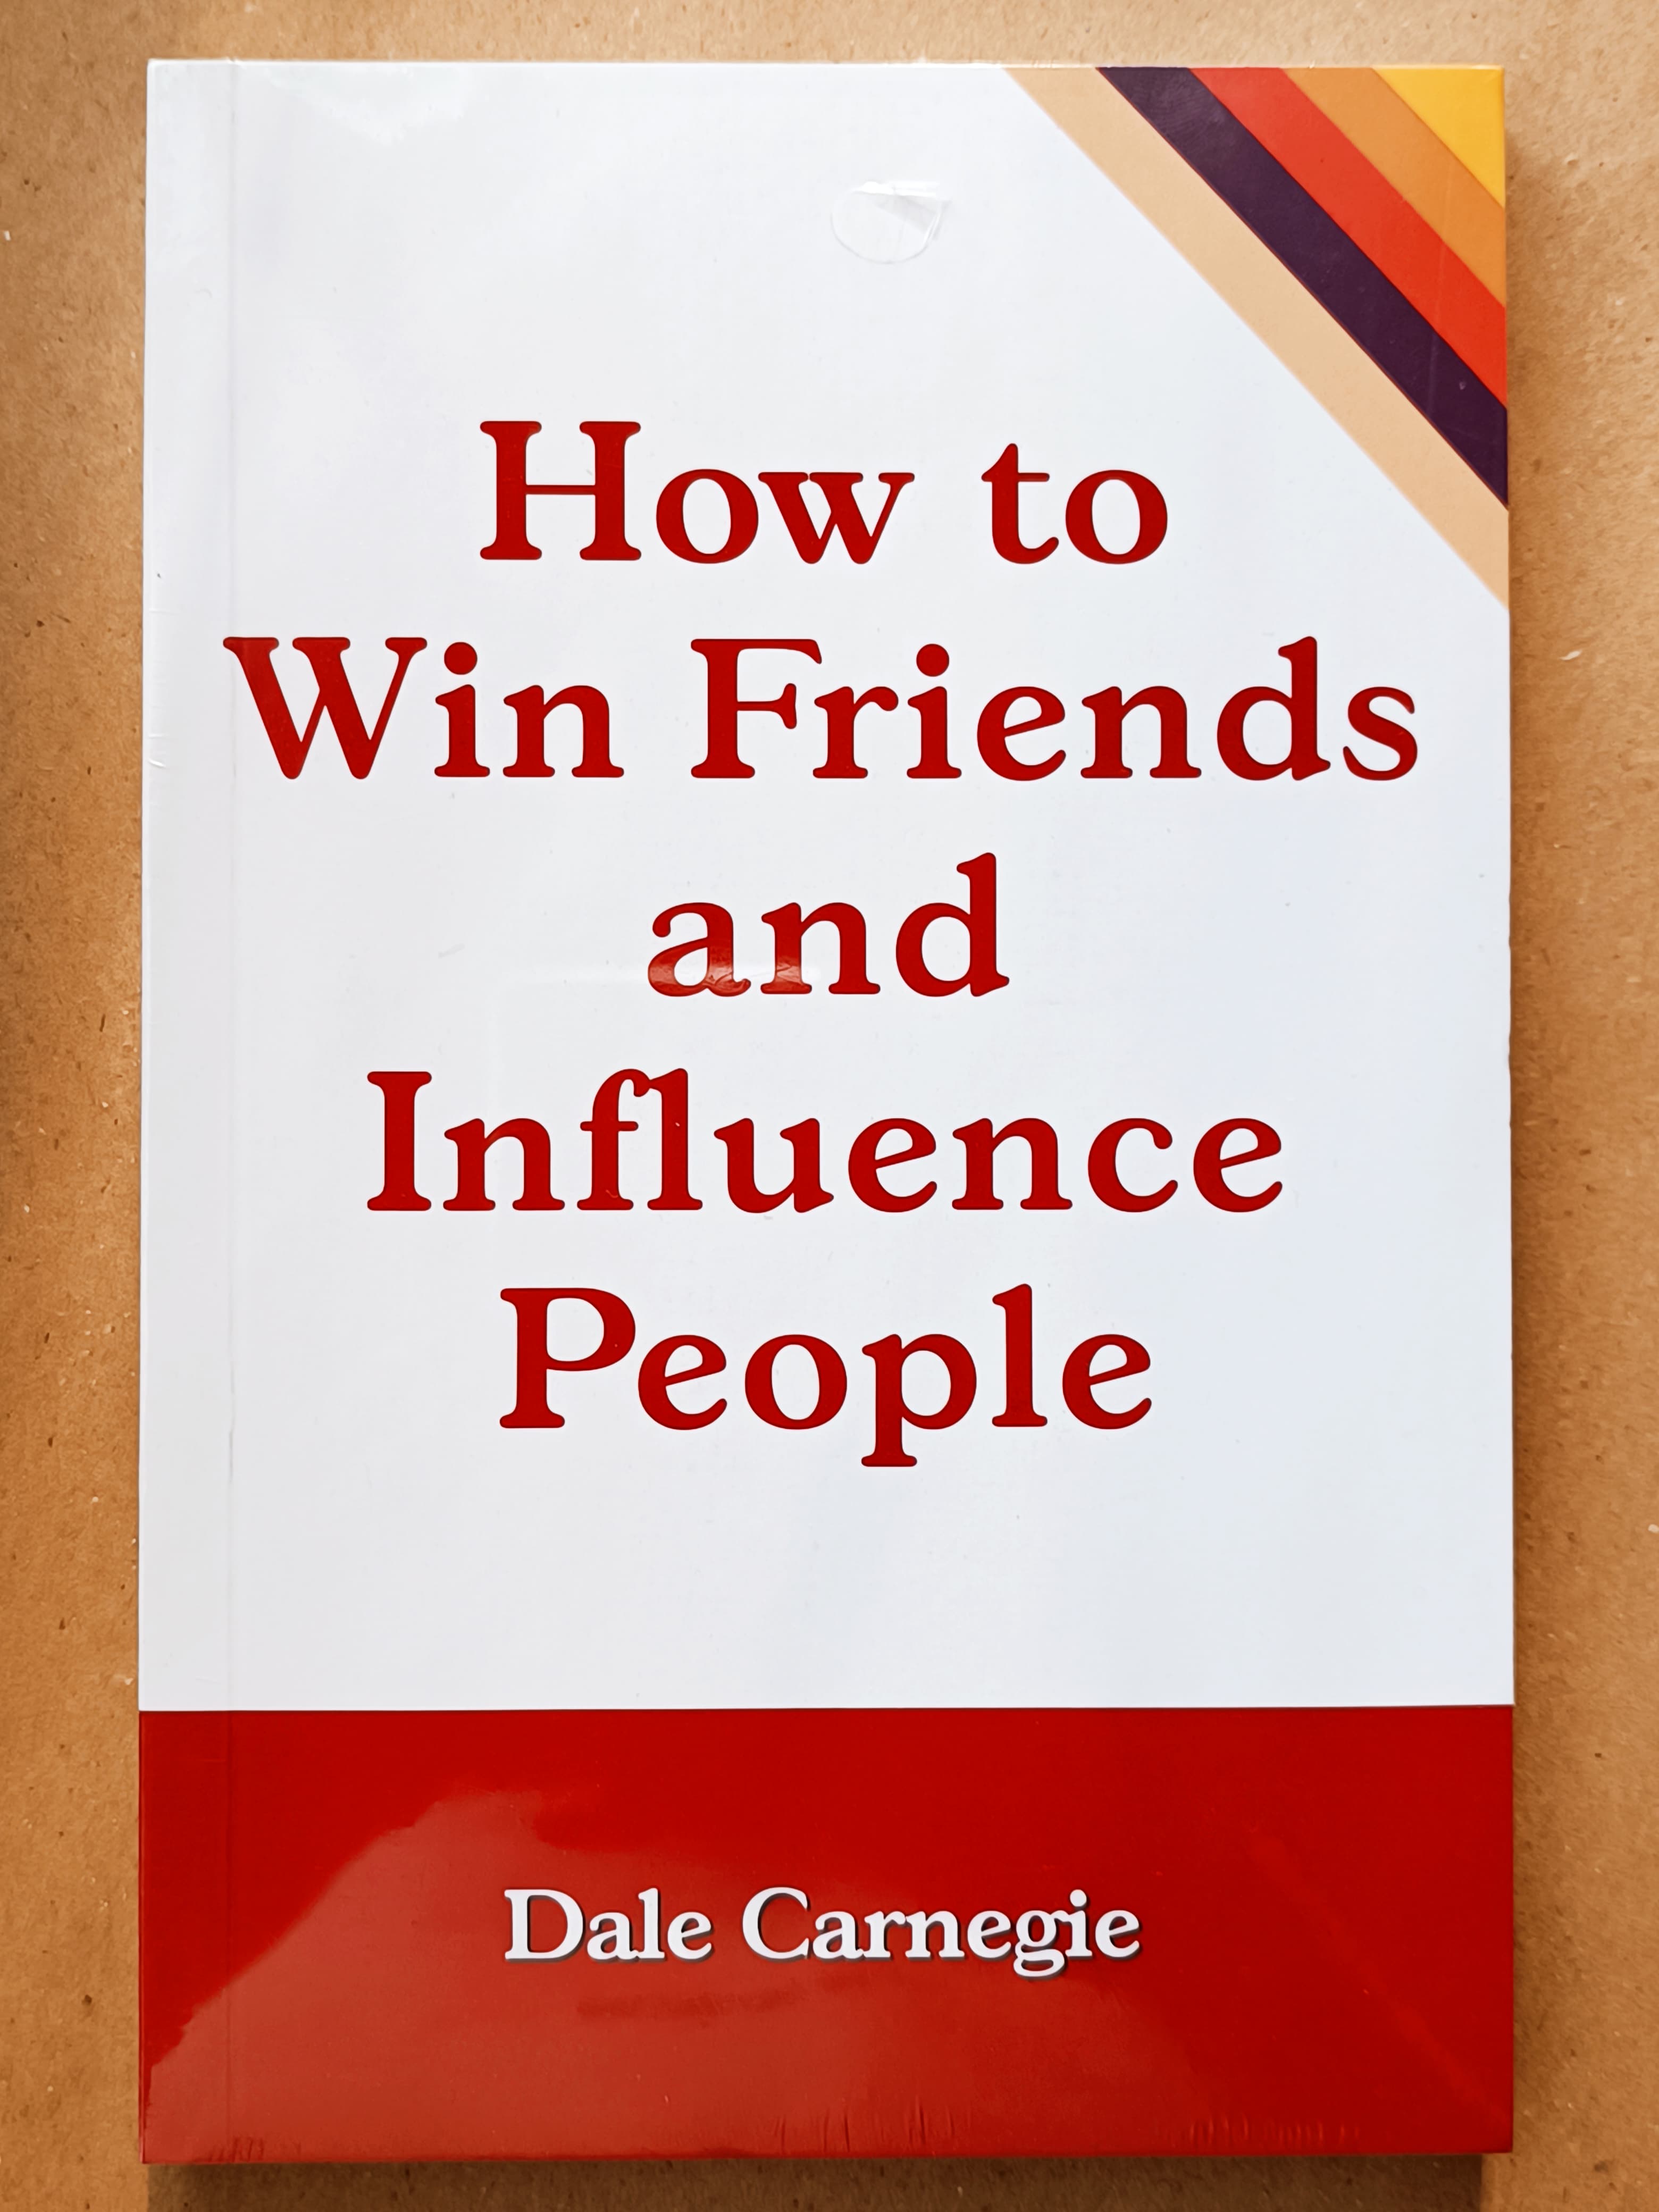 Dale　MOB10656　How　–　influence　By　Friends　to　win　Carnegie　and　People